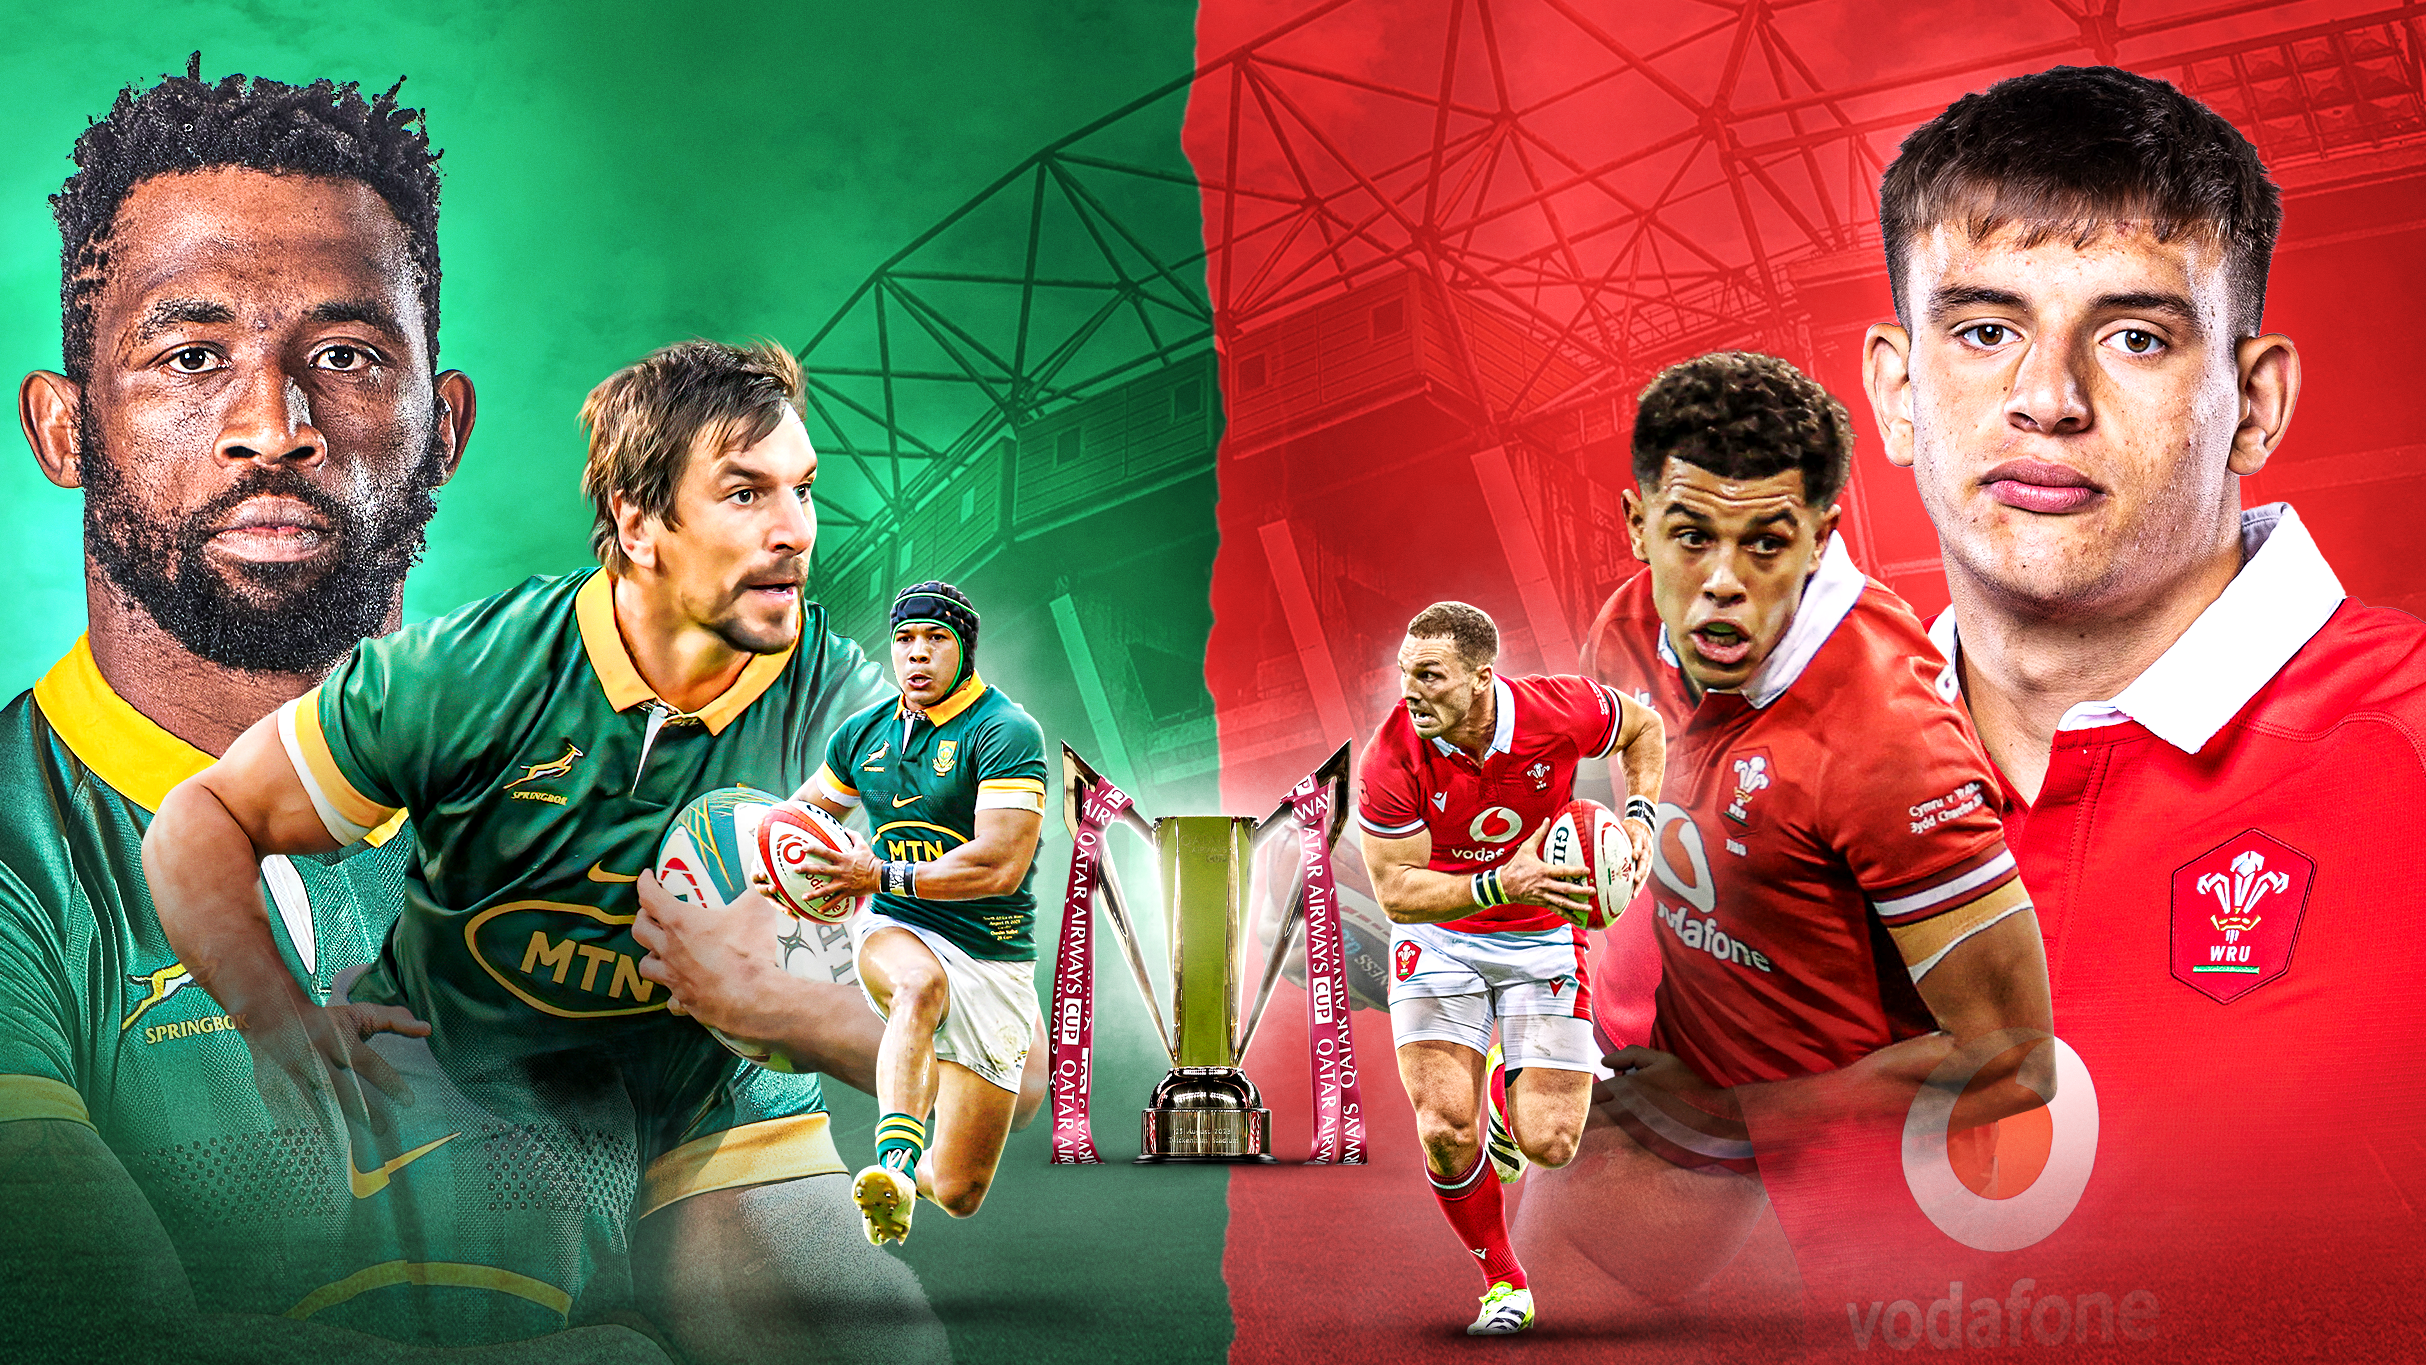 Doubleheader - South Africa v Wales (2pm) & Barbarians v Fiji (5:15pm)